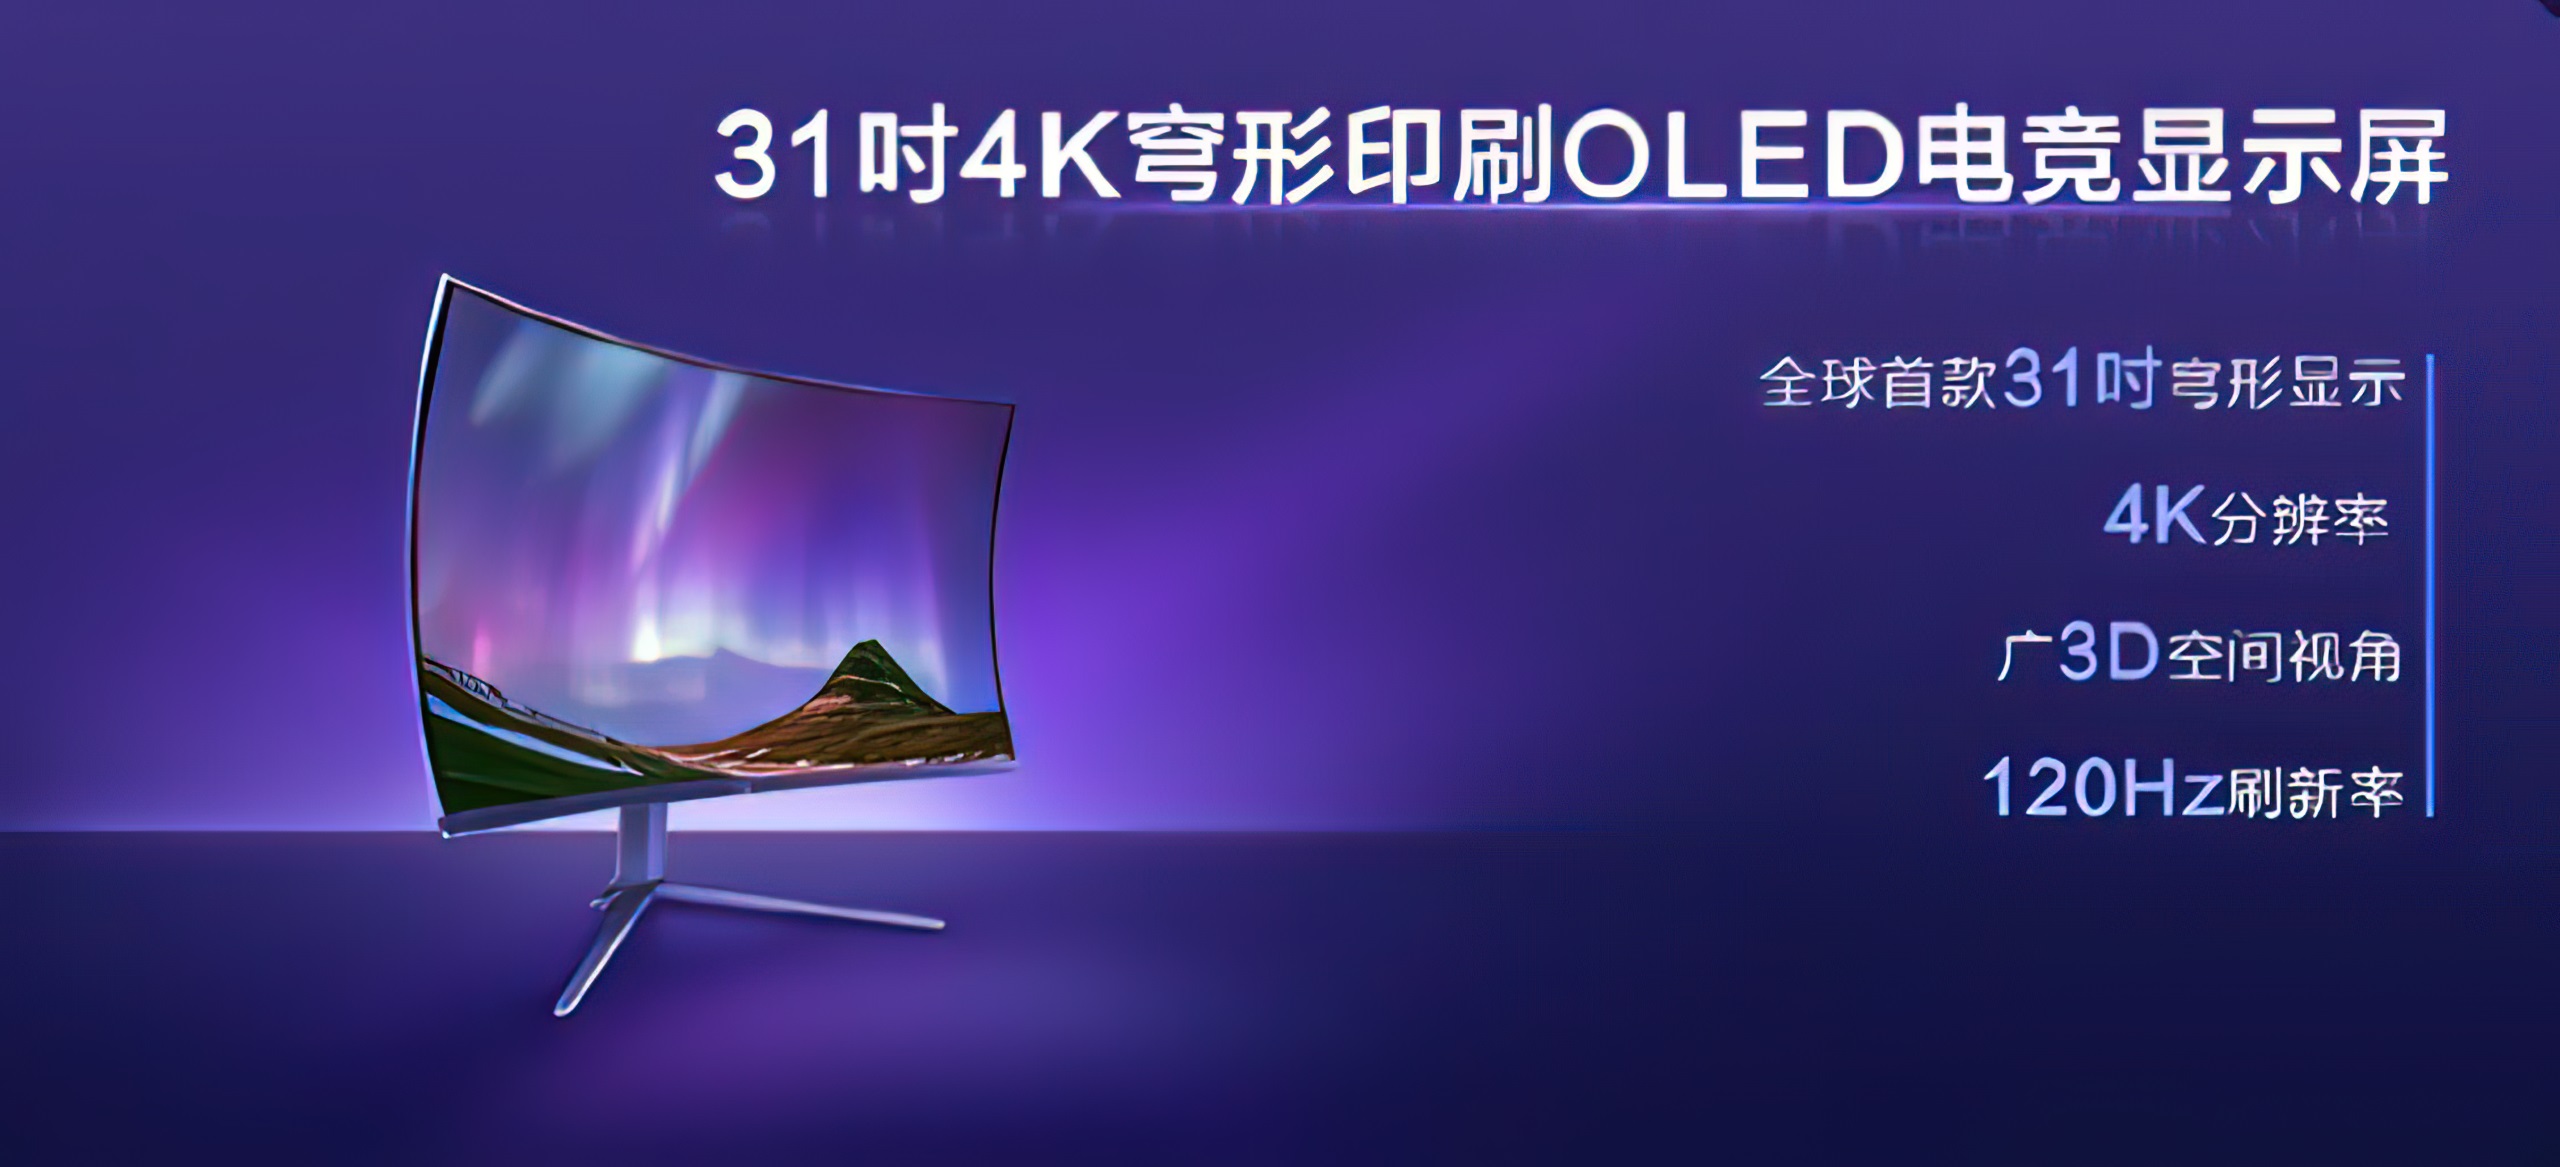 Announcement banner of the TCL dome-shaped 31-inch monitor.